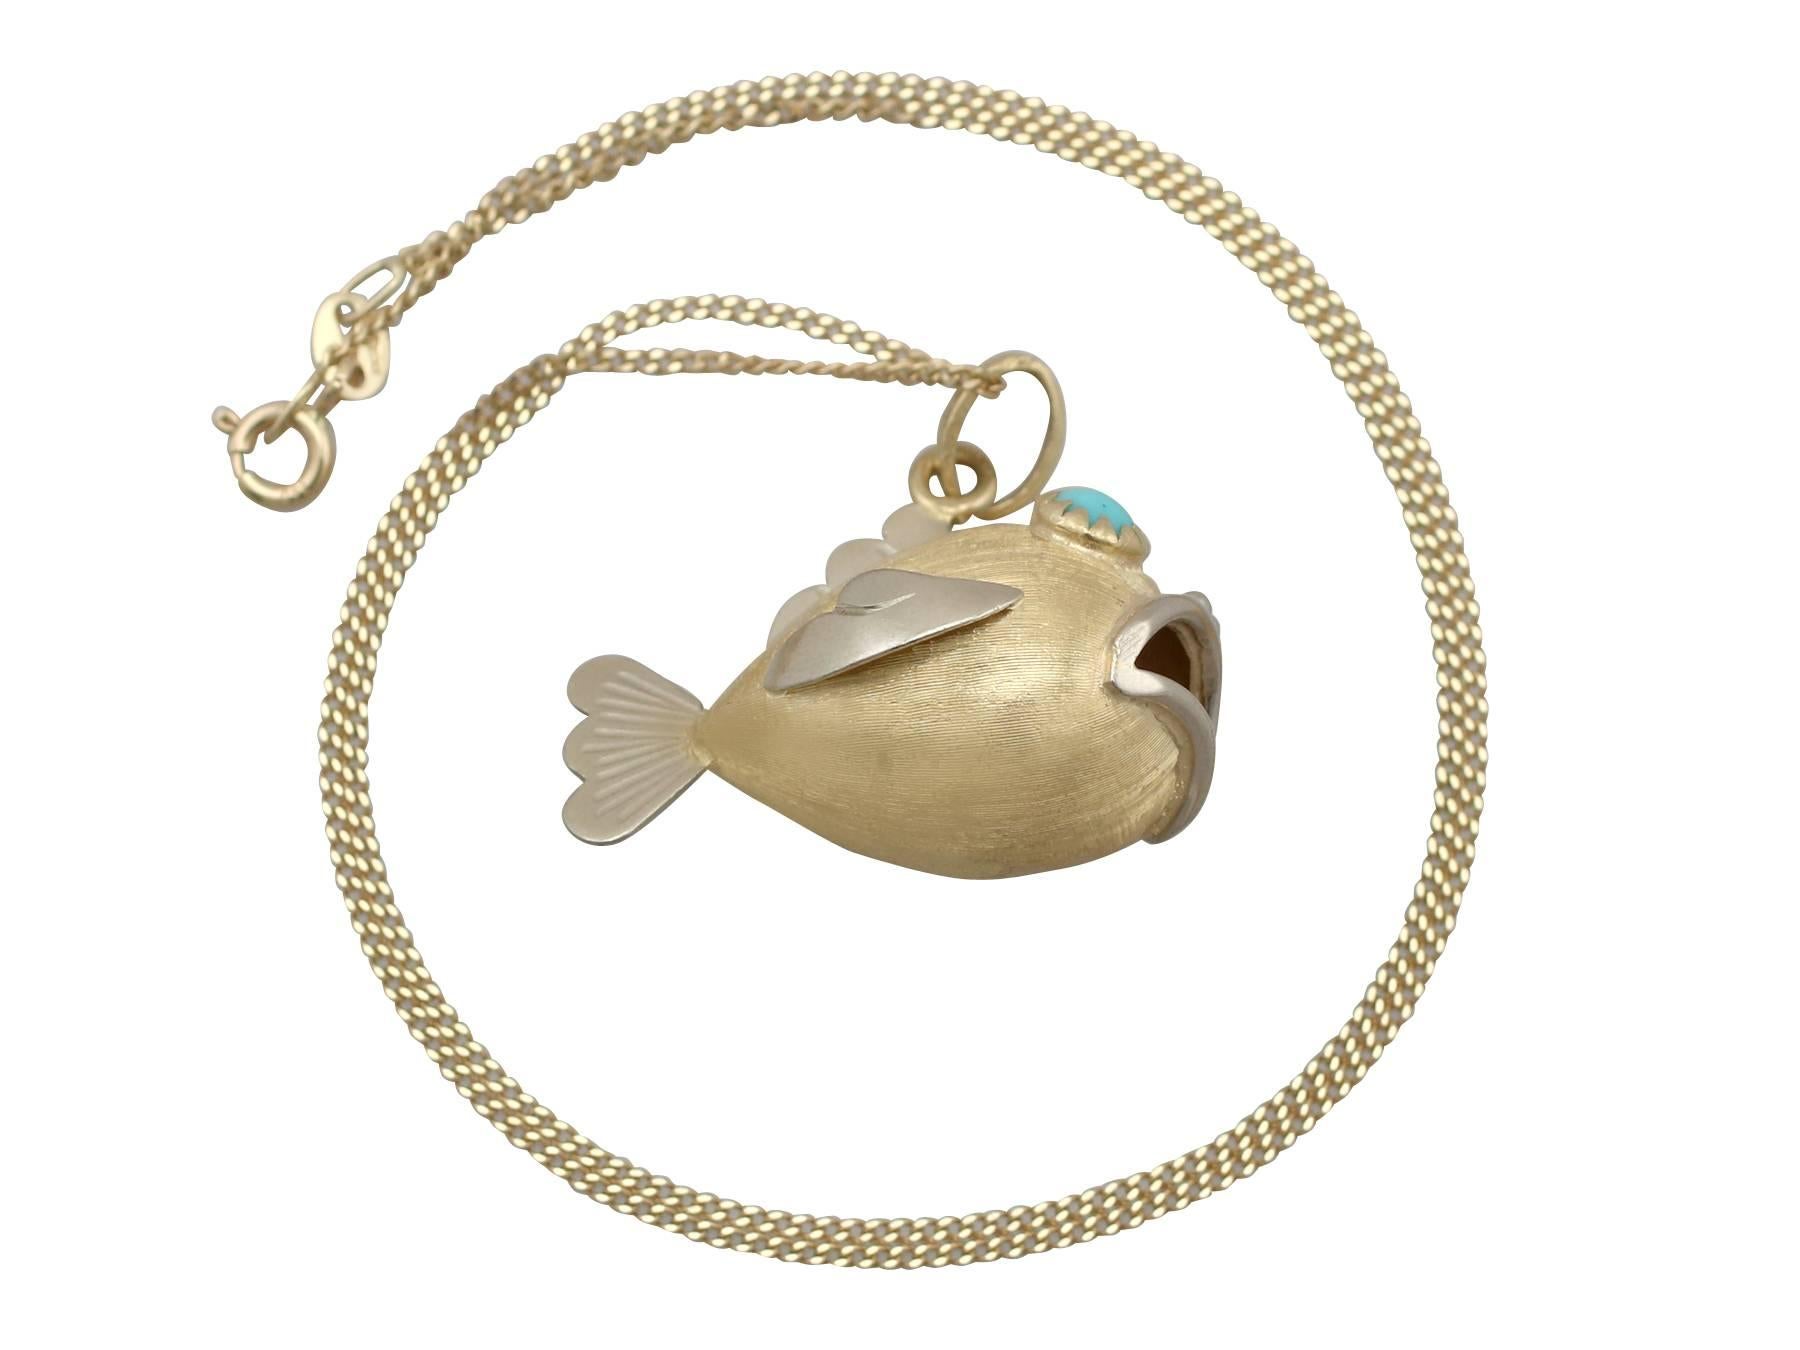 A fine and impressive turquoise, 18 karat yellow gold and 18 karat white gold 'fish' pendant; part of our diverse vintage jewelry and estate jewelry collections

This fine and impressive vintage fish pendant has been crafted in 18k yellow and white